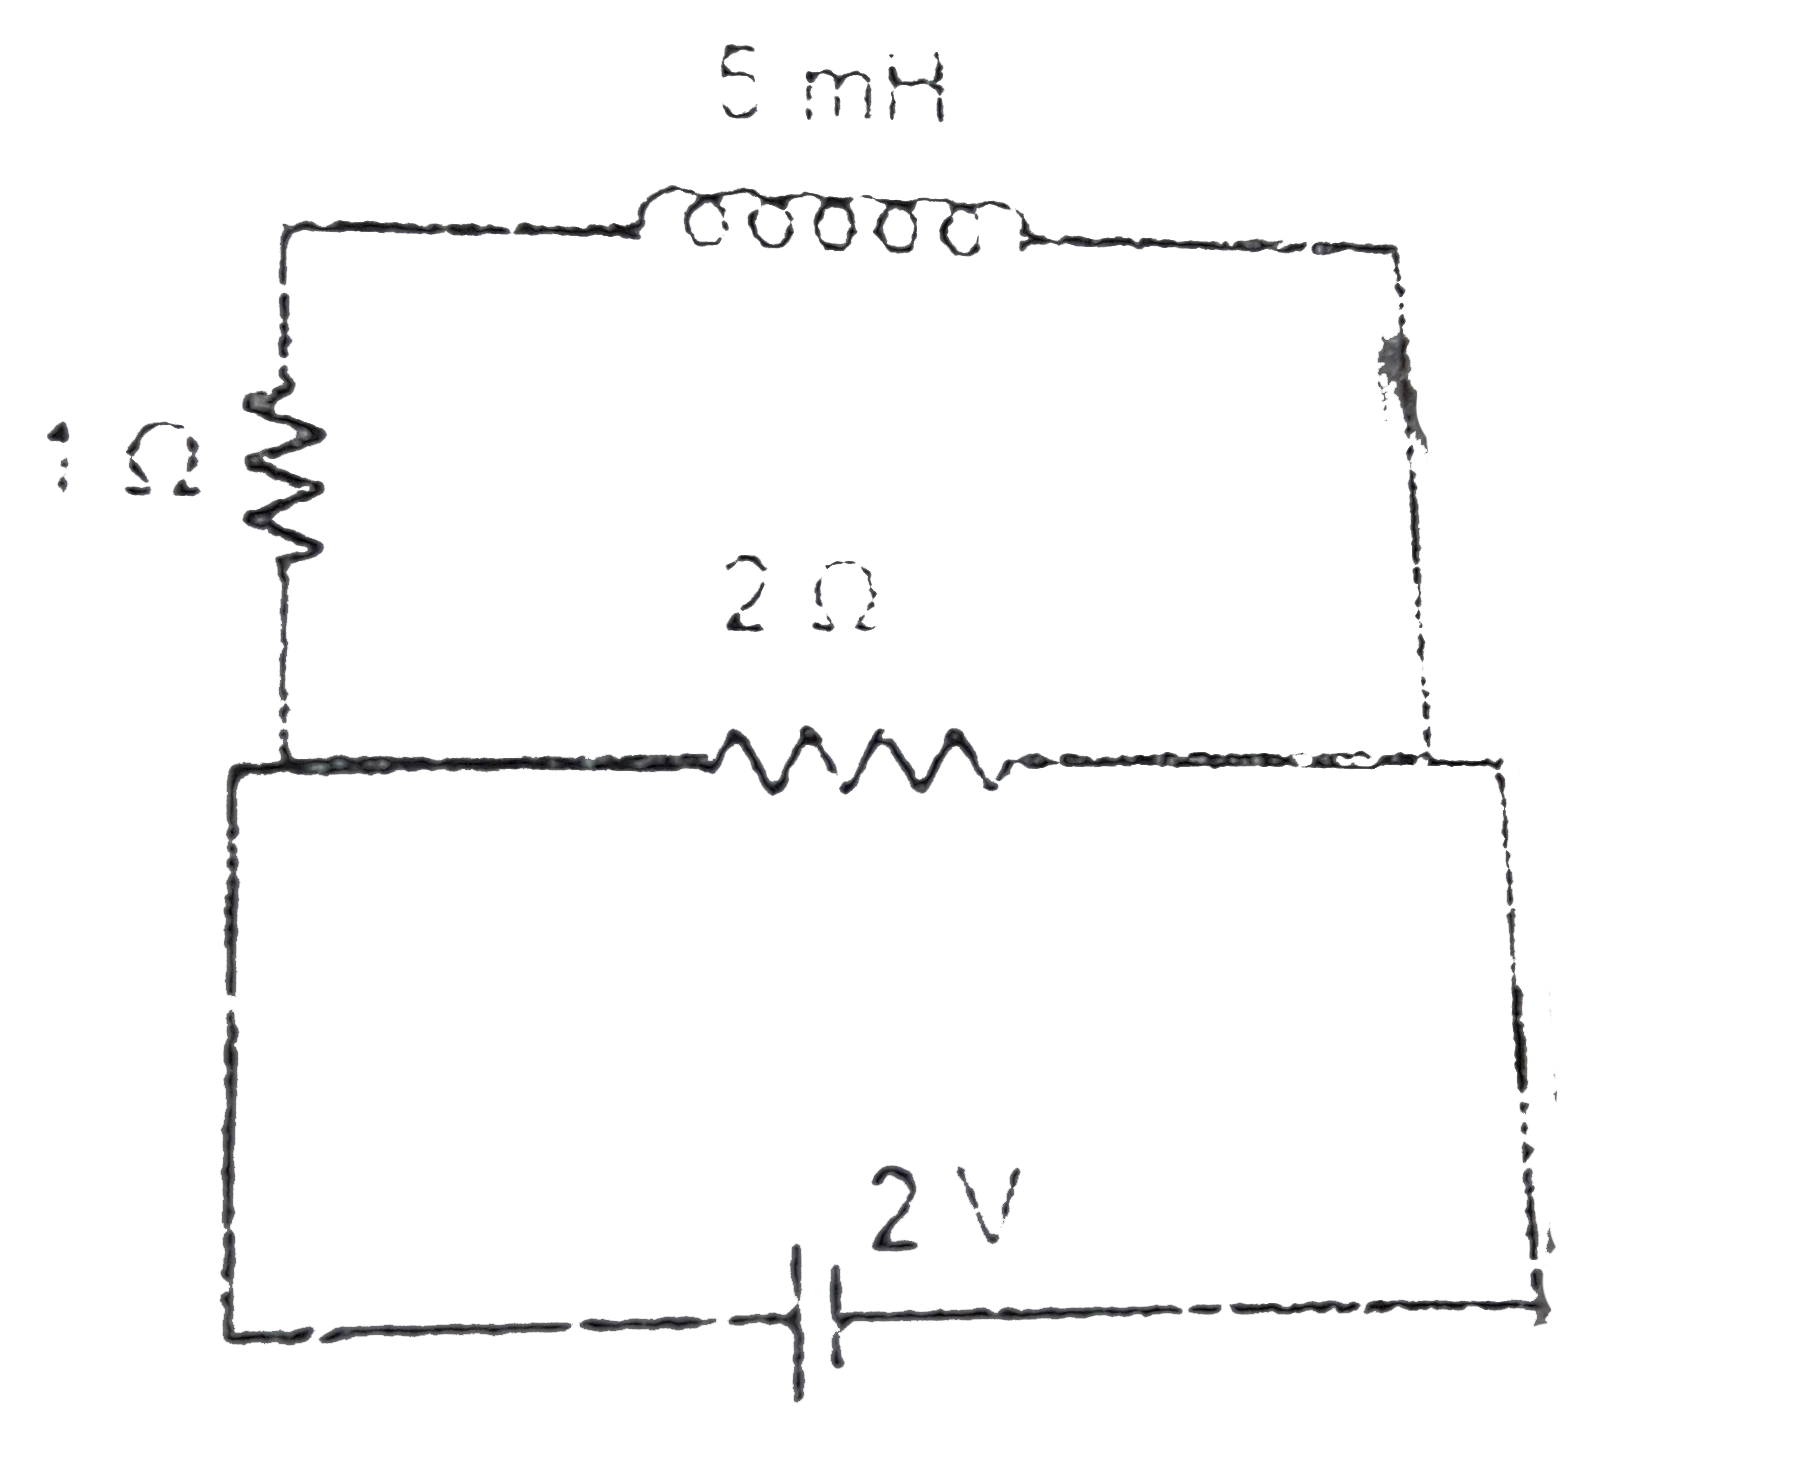 When induced emf in inductor coil is 50% of its maximum value then stored energy in inductor coil in the given circuit at that instant will be:-